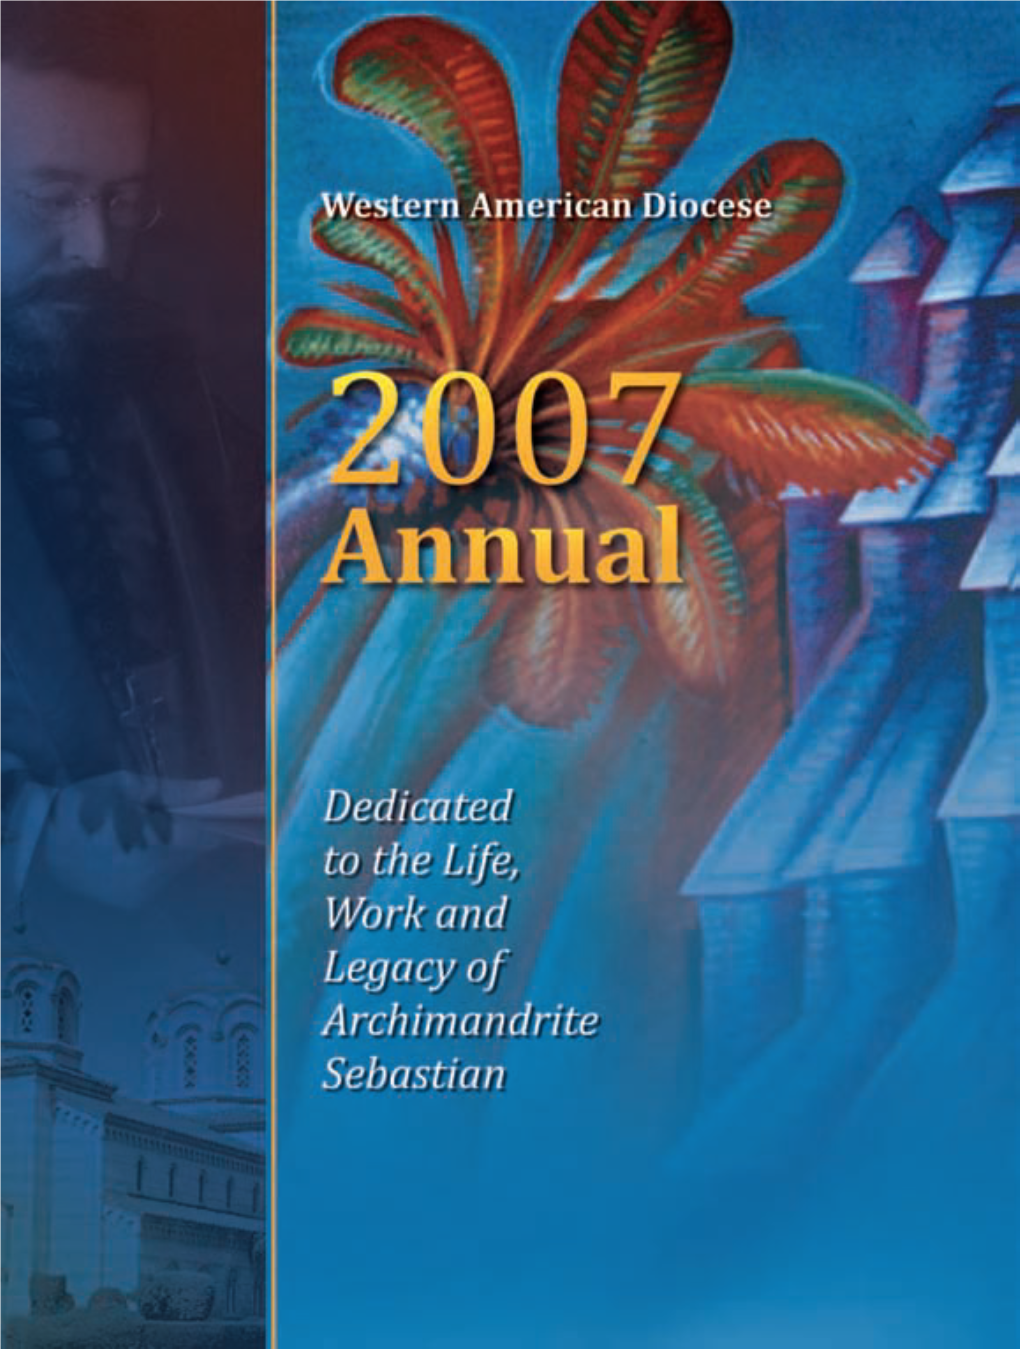 Western American Diocese 2007 ANNUAL Dedicated to the Life, Work and Legacy of Archimandrite Sebastian